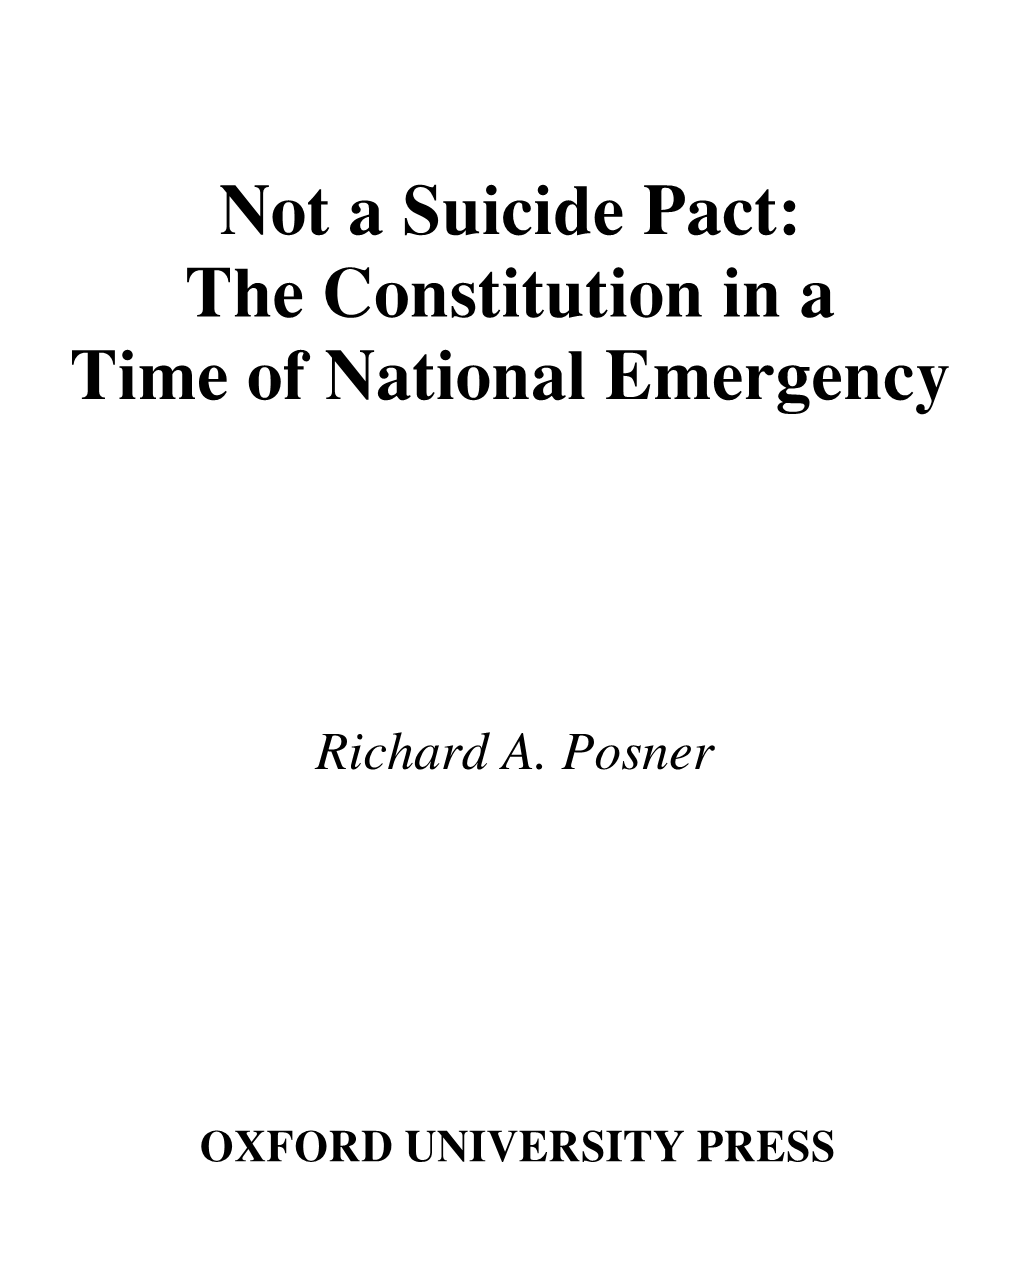 Not a Suicide Pact: the Constitution in a Time of National Emergency